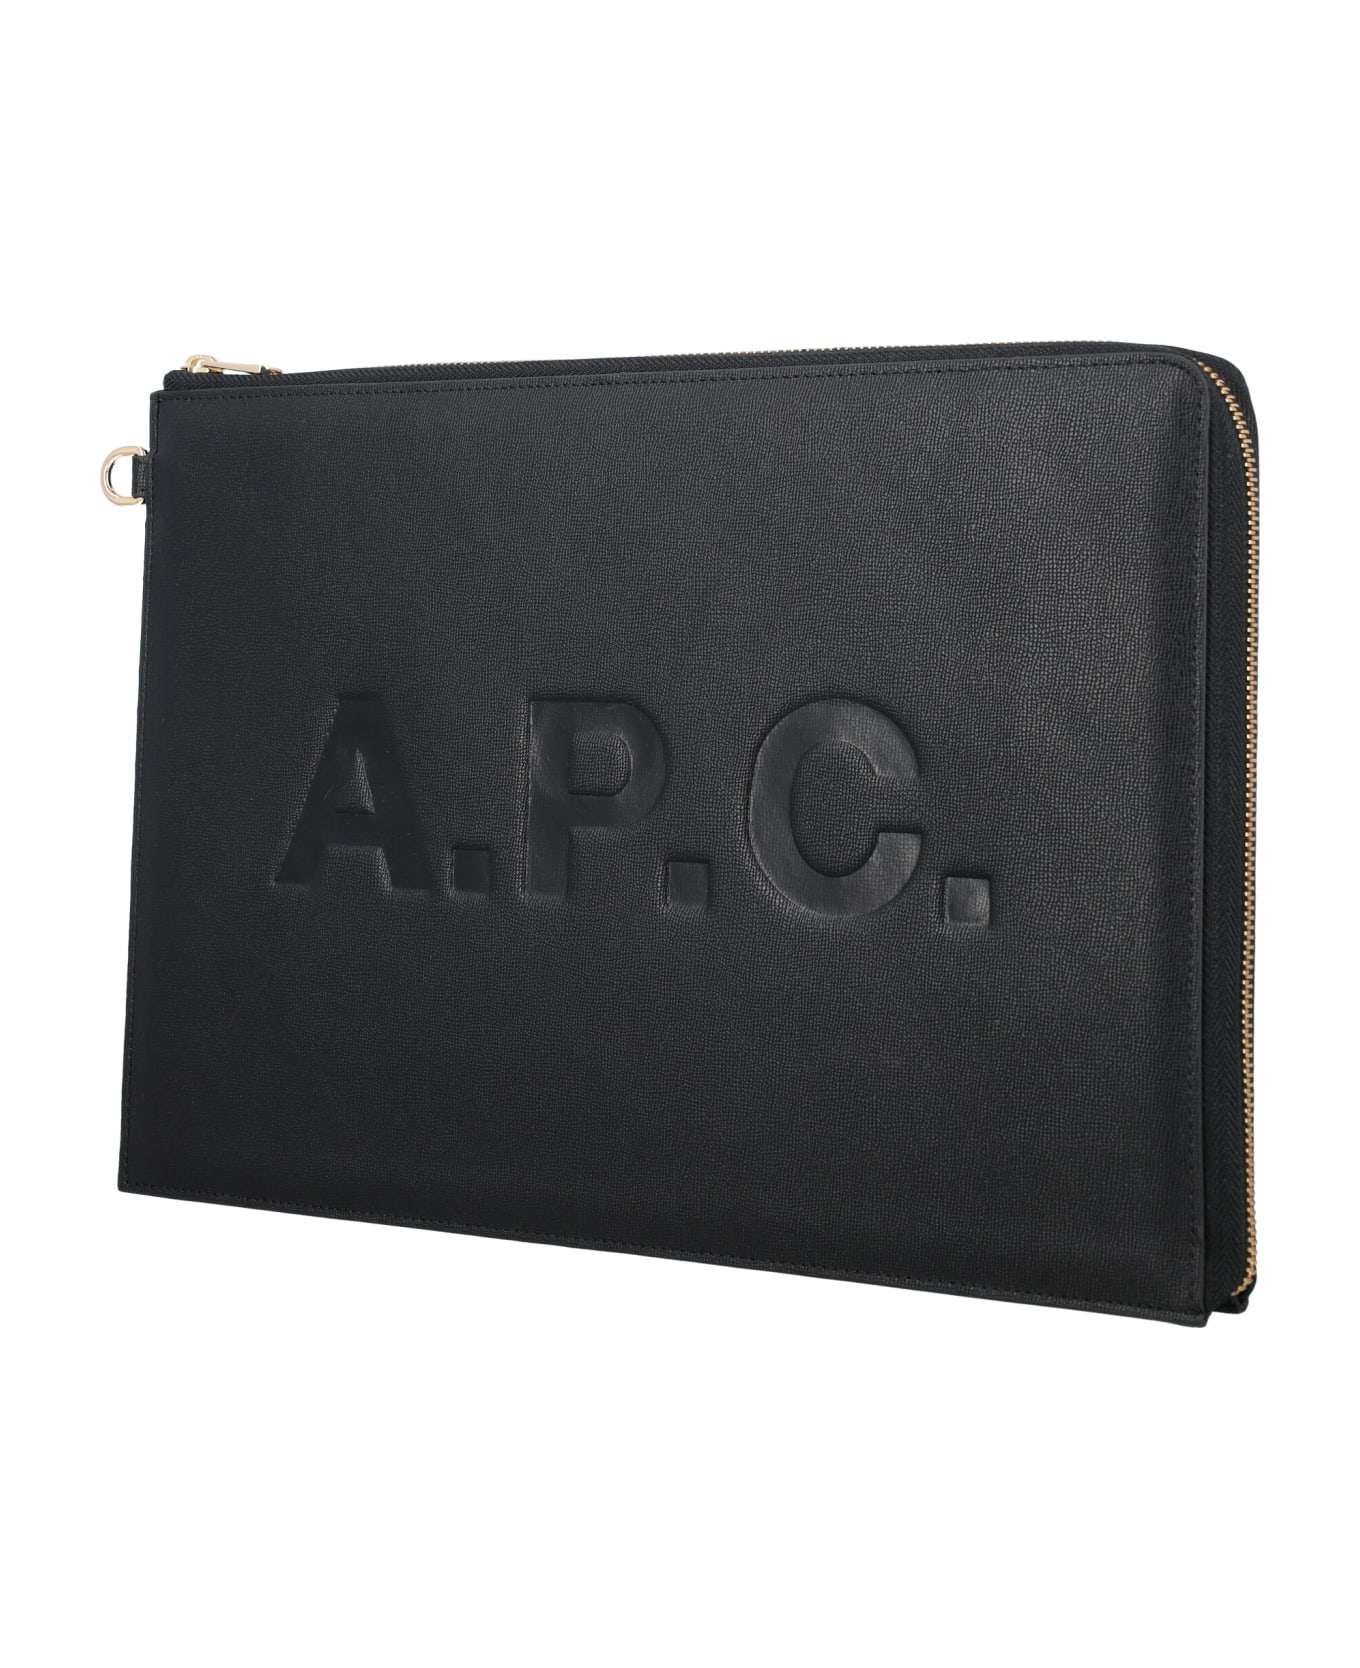 A.P.C. Briefcase With Logo - BLACK クラッチバッグ